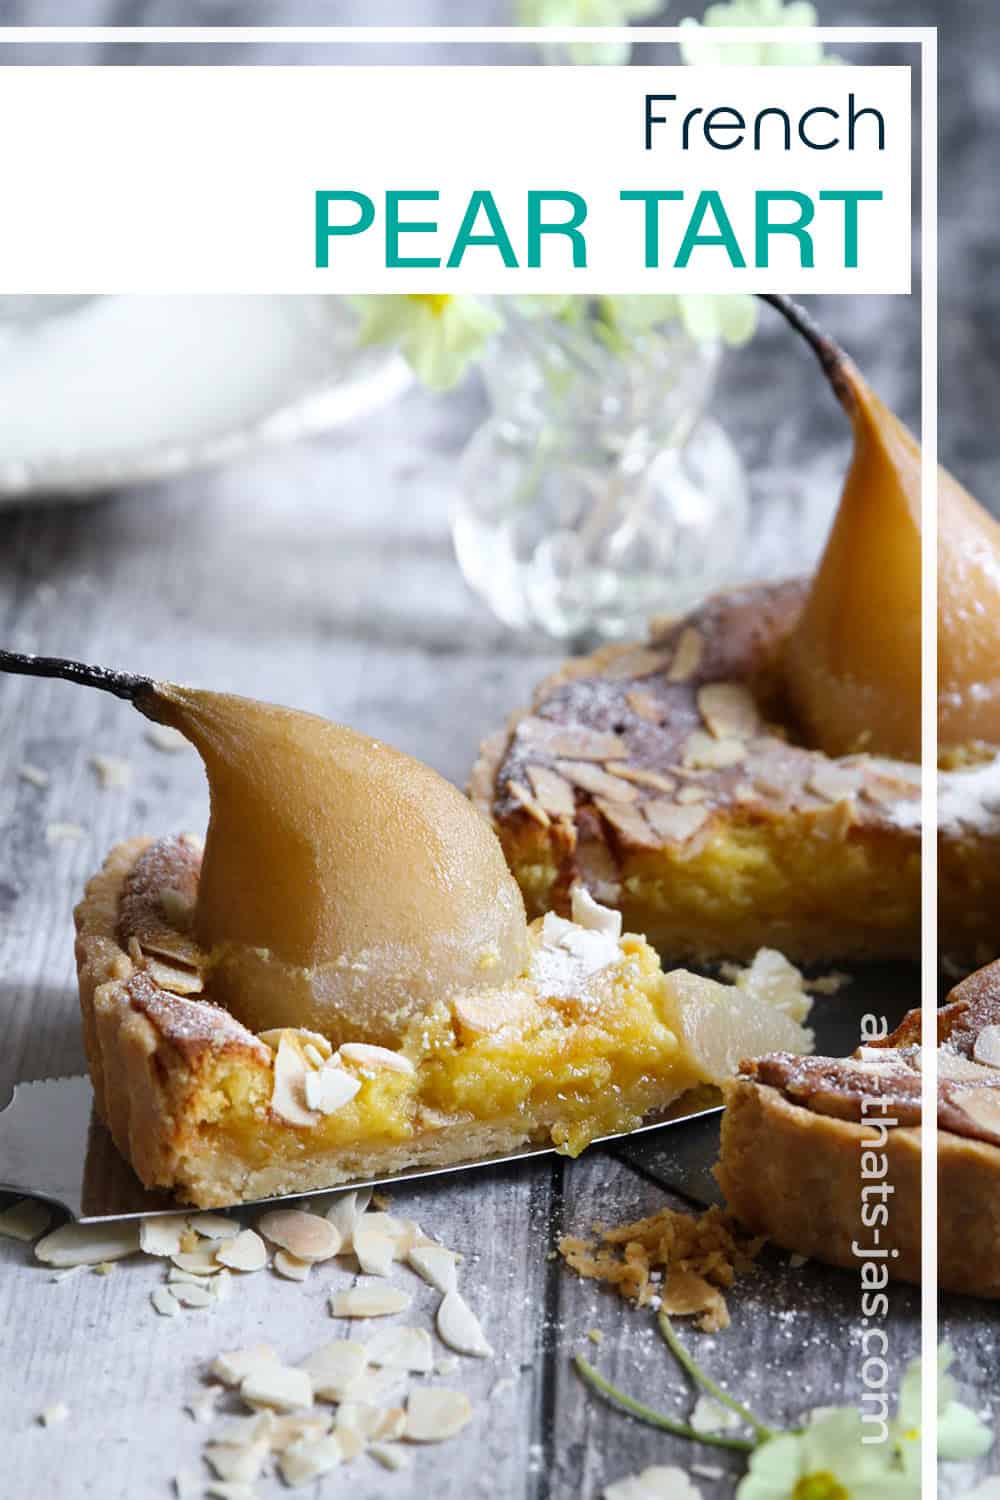 A close up of a slice of pear tart with text overlay.